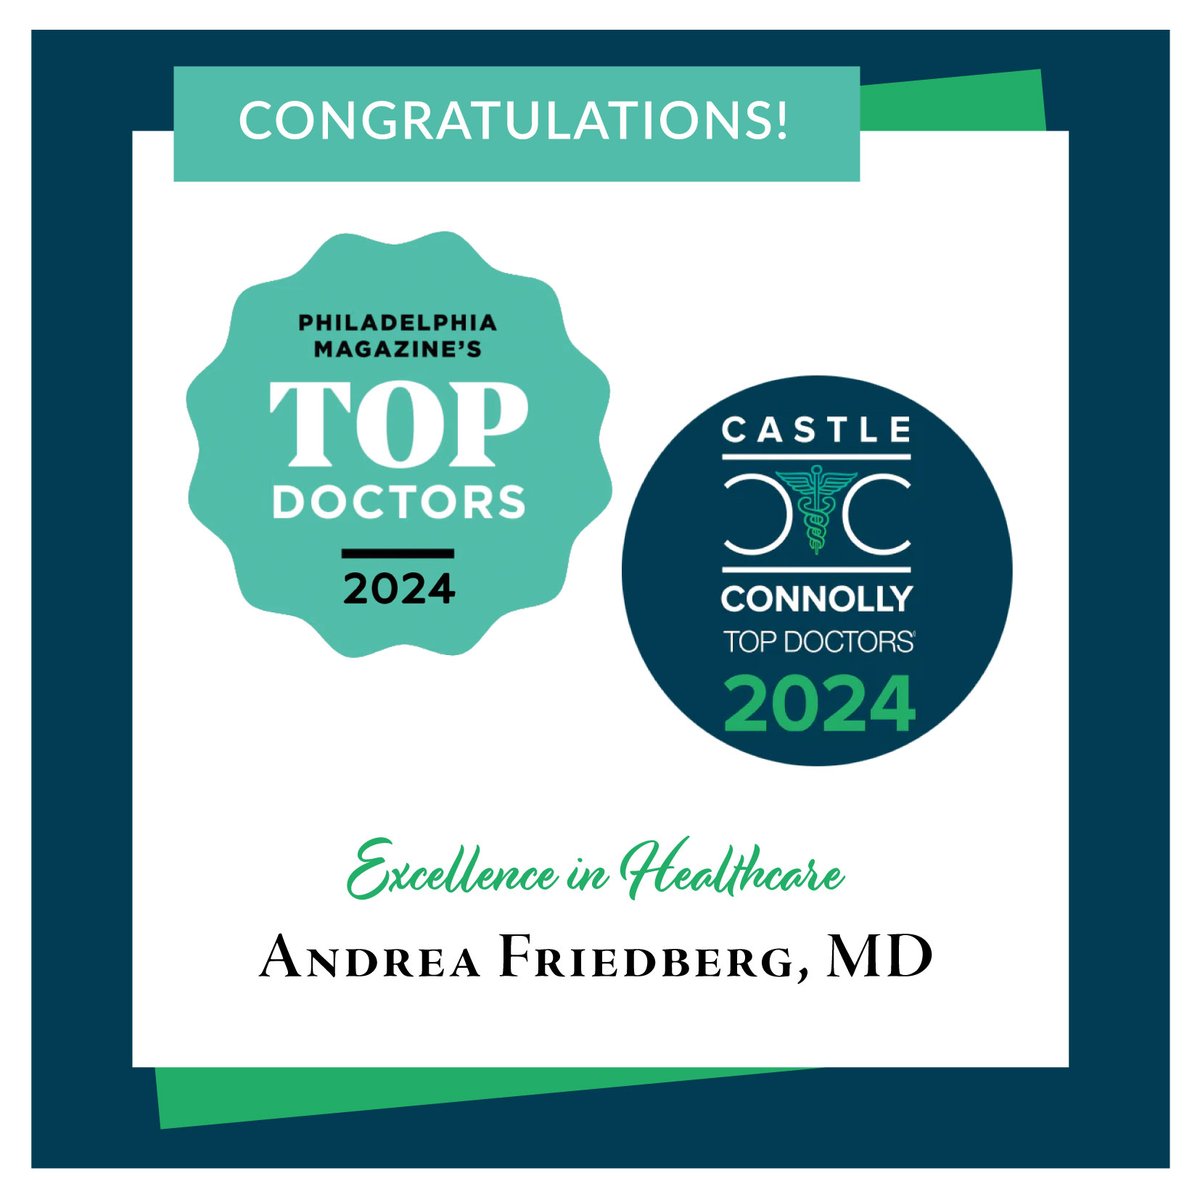 We're thrilled to announce that Dr. Andrea Friedberg has been awarded the prestigious #TopDoctor Awards from #PhiladelphiaMagazine and #CastleConnollyTopDoctors! 🎉👏

Let's congratulate Dr. Friedberg for her remarkable achievement! 🏆

#NJ #SouthJersey #GloucesterCountyNJ